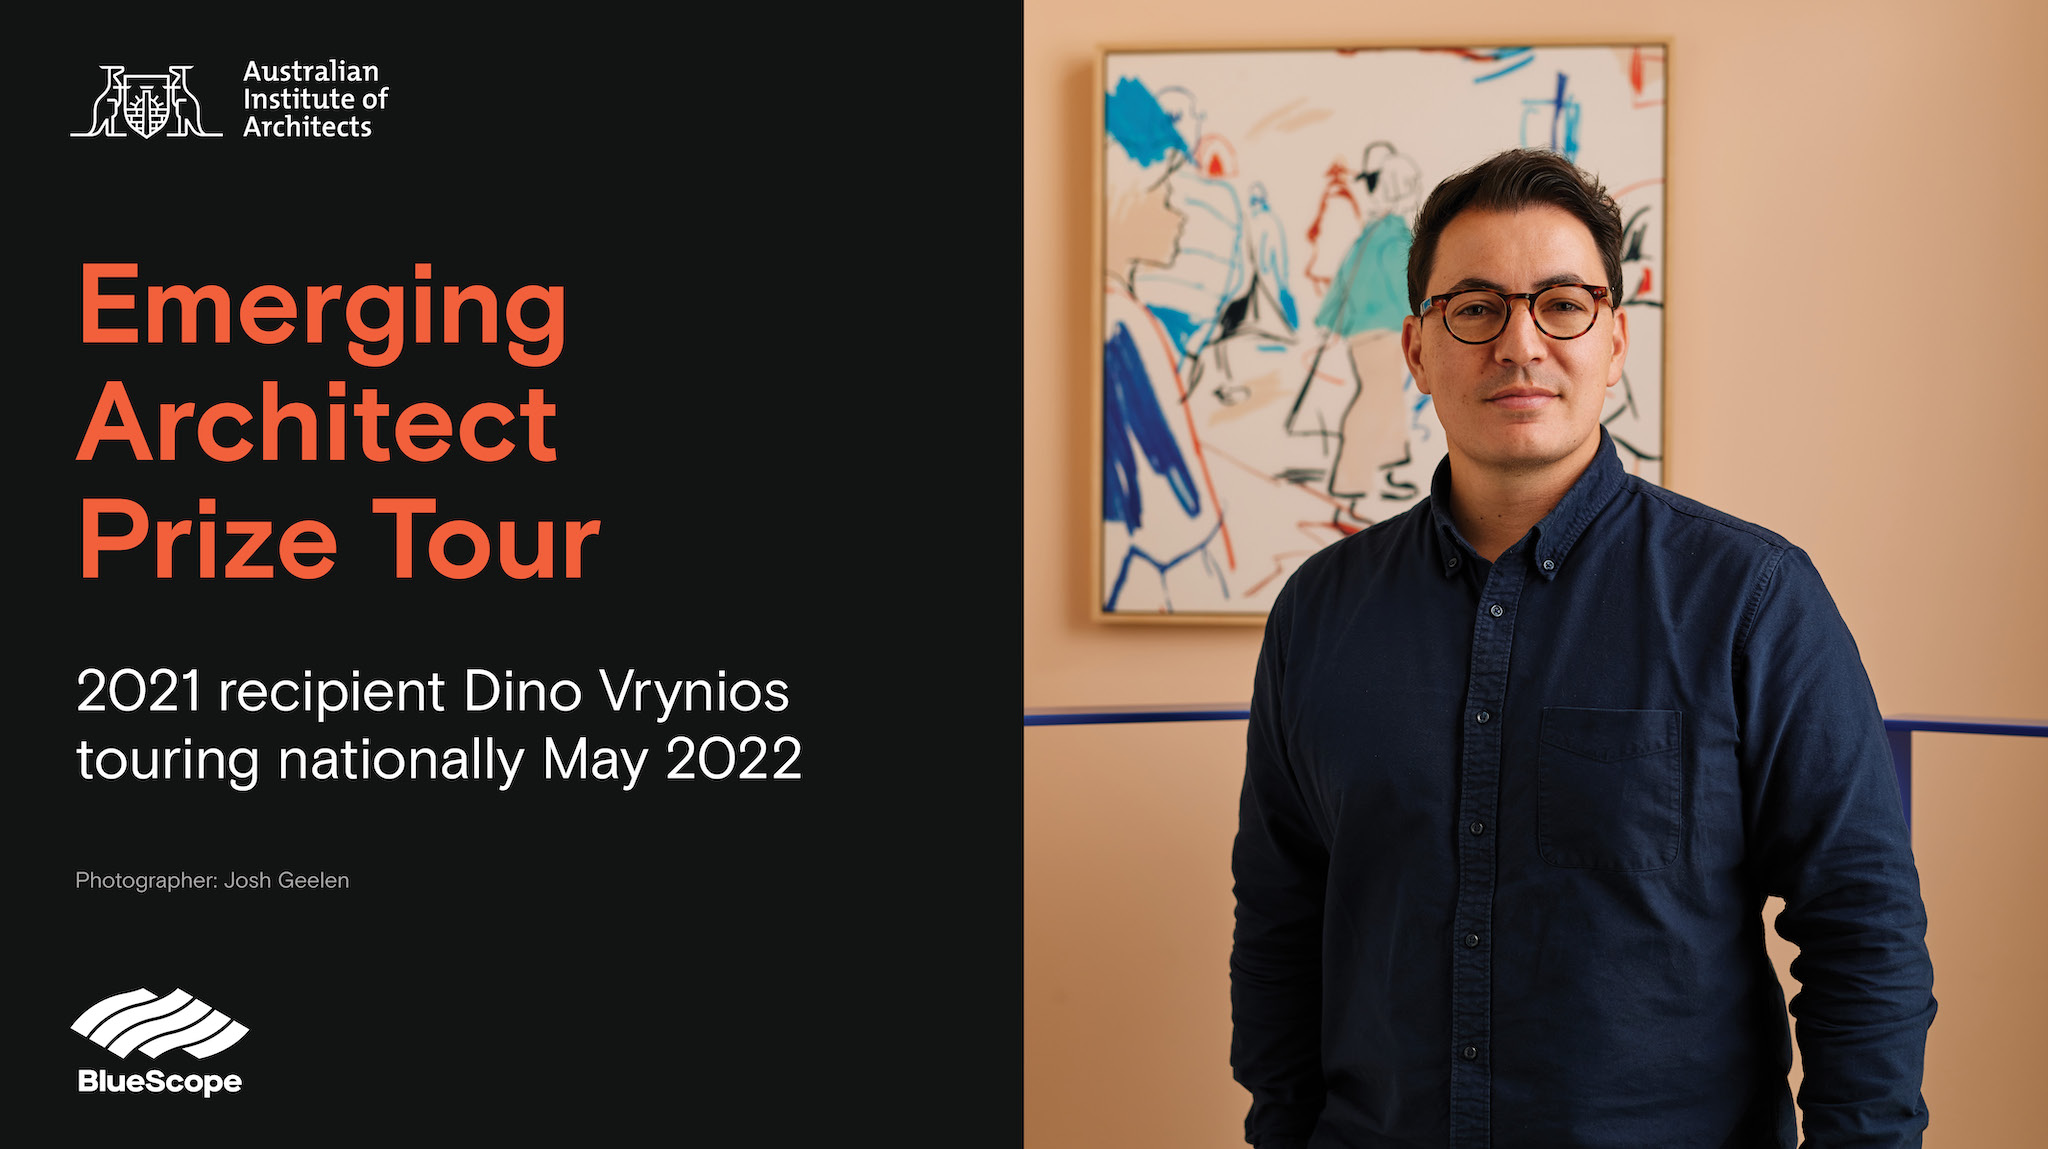 VIC Emerging Architect Prize Tour with Dino Vrynios